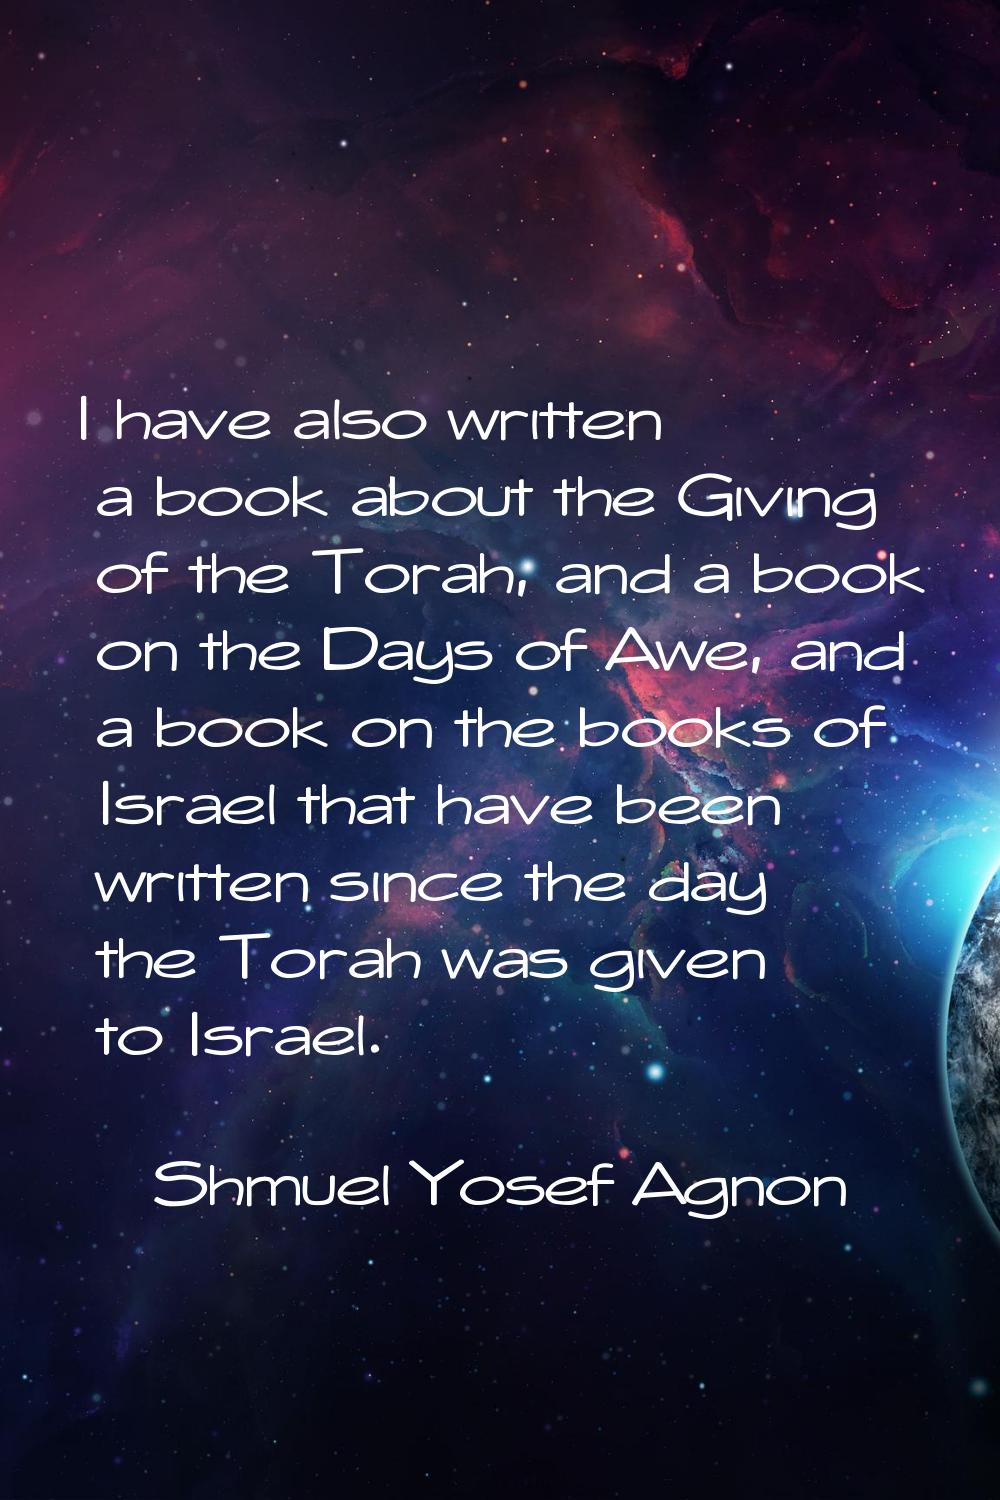 I have also written a book about the Giving of the Torah, and a book on the Days of Awe, and a book